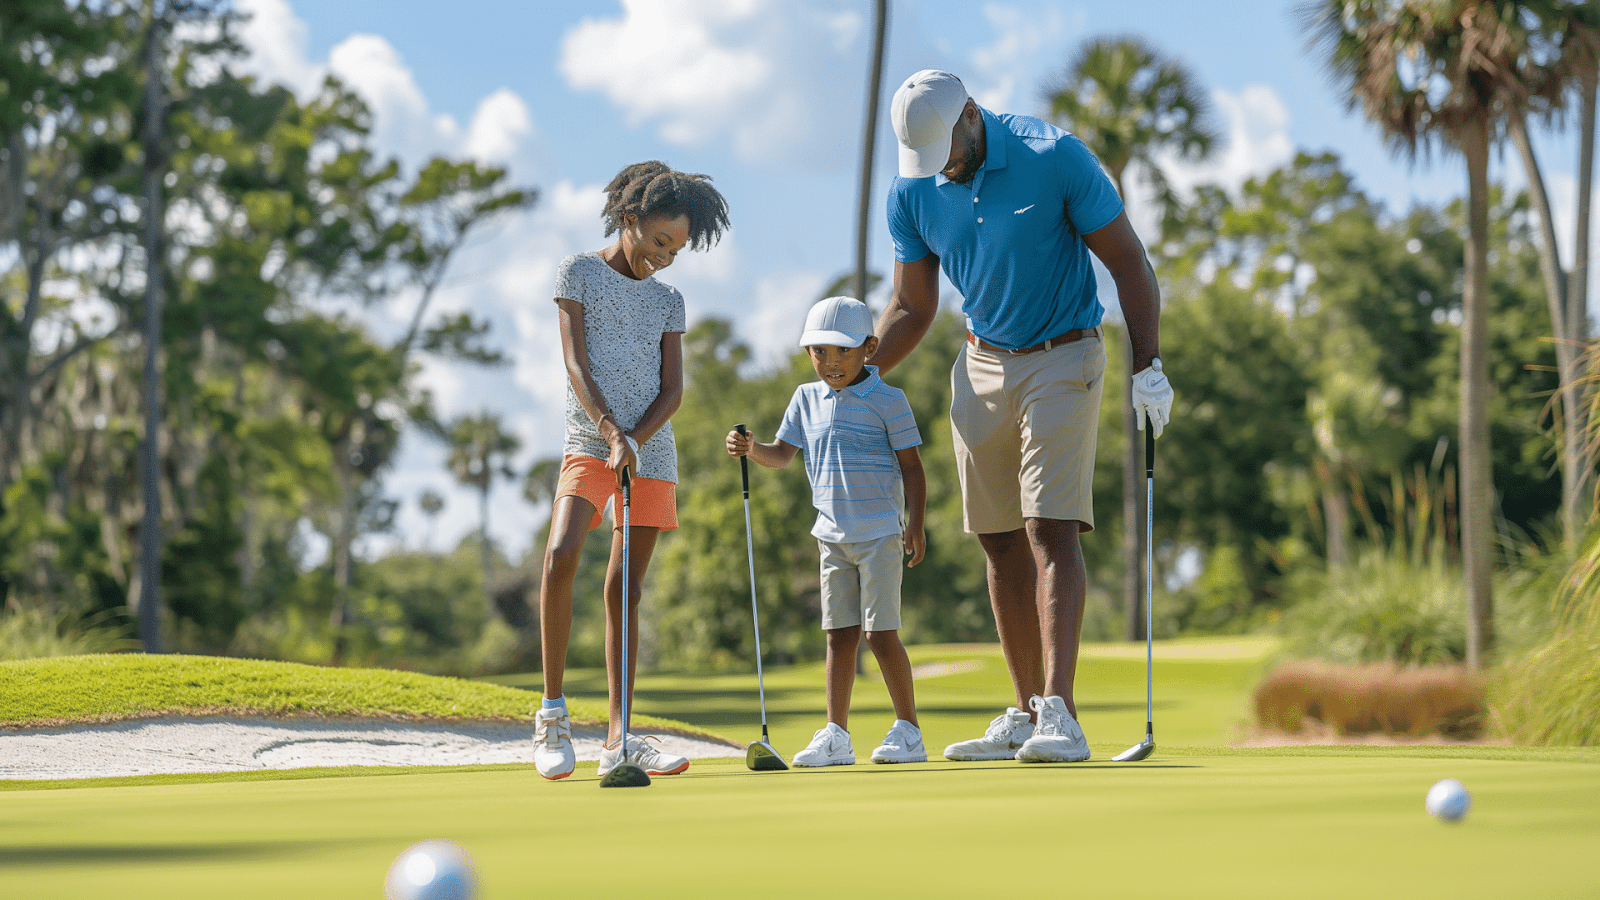 A family having fun putting on the green at a Palmetto Dunes golf course in Hilton Head